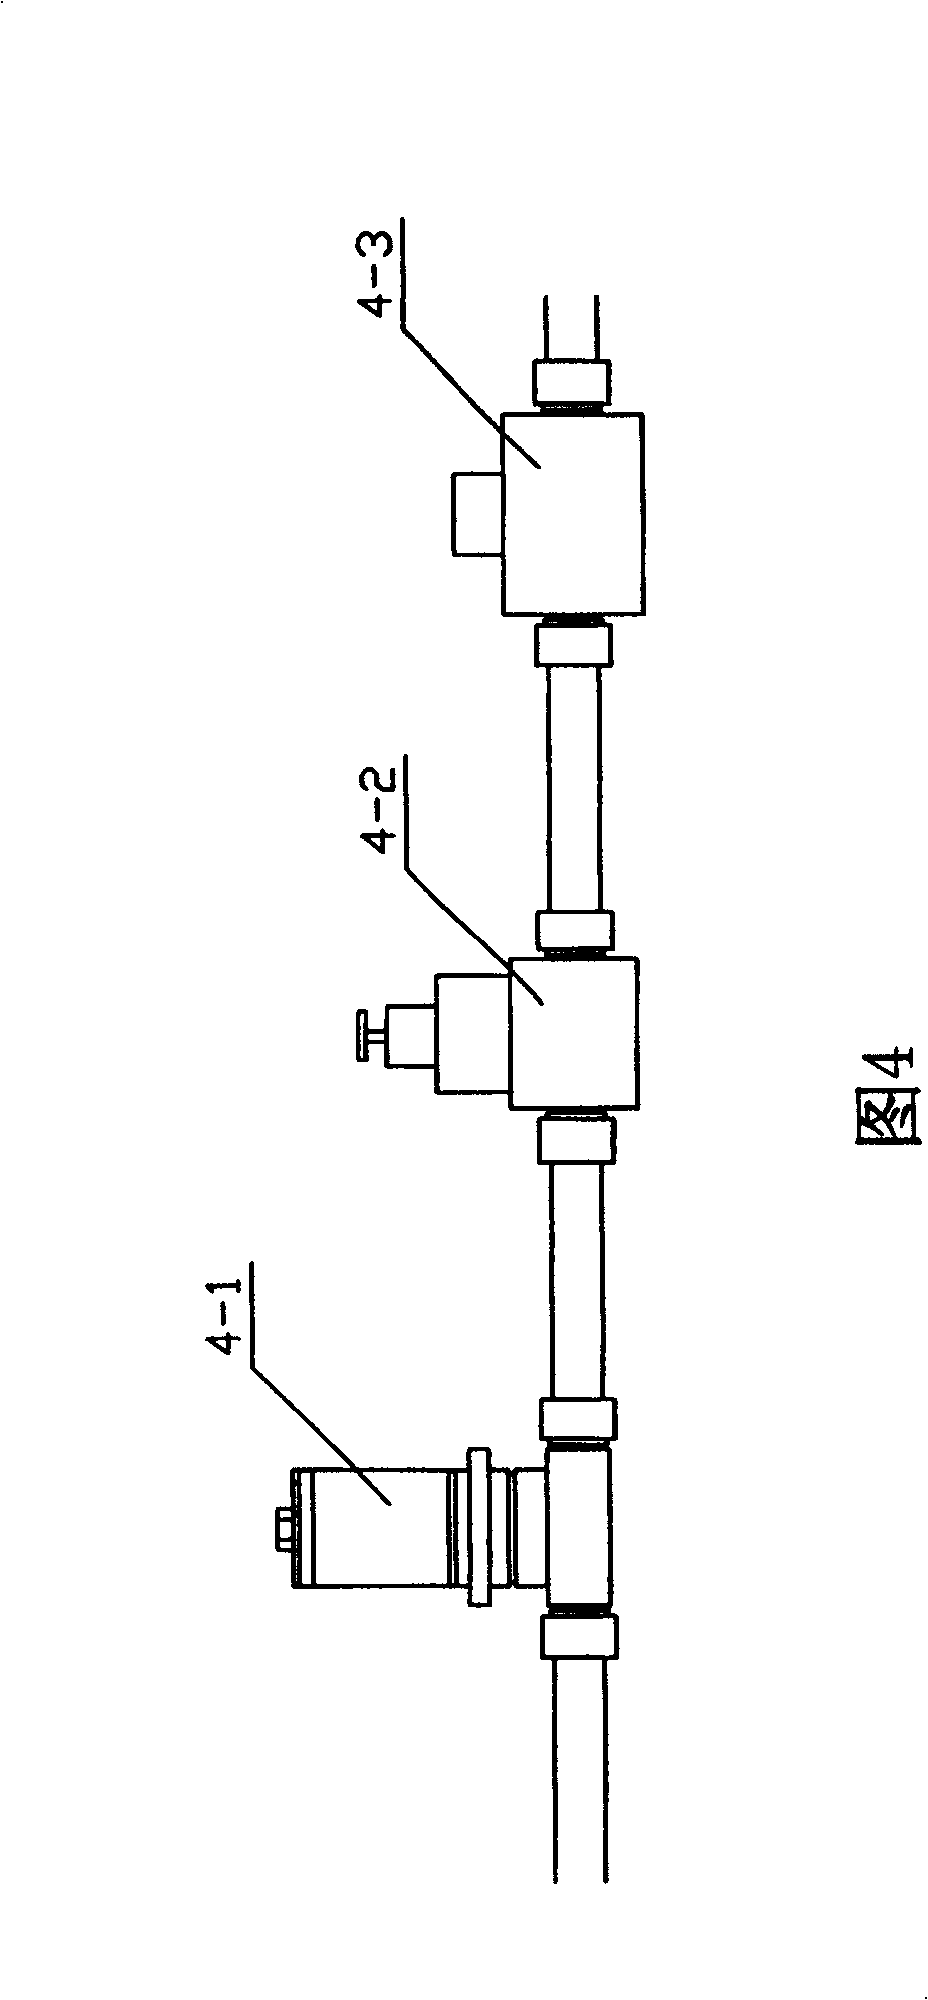 Method for continuous hypothermal desiccation and sterilization of bony tissue, and equipment therefor